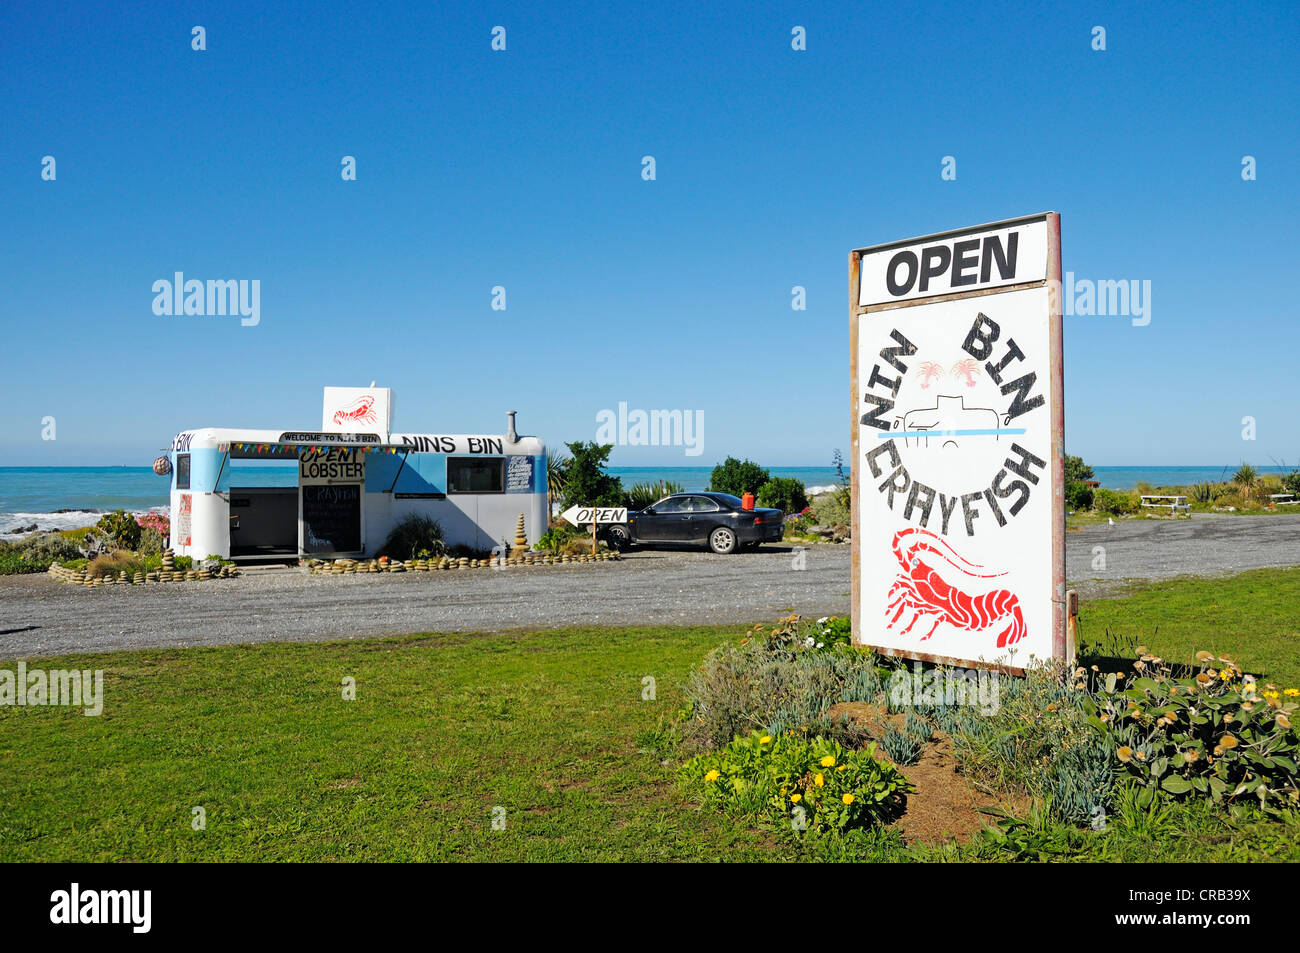 Takeaway offering spiny lobsters, seafood and fish, Kaikoura, South Island, New Zealand Stock Photo